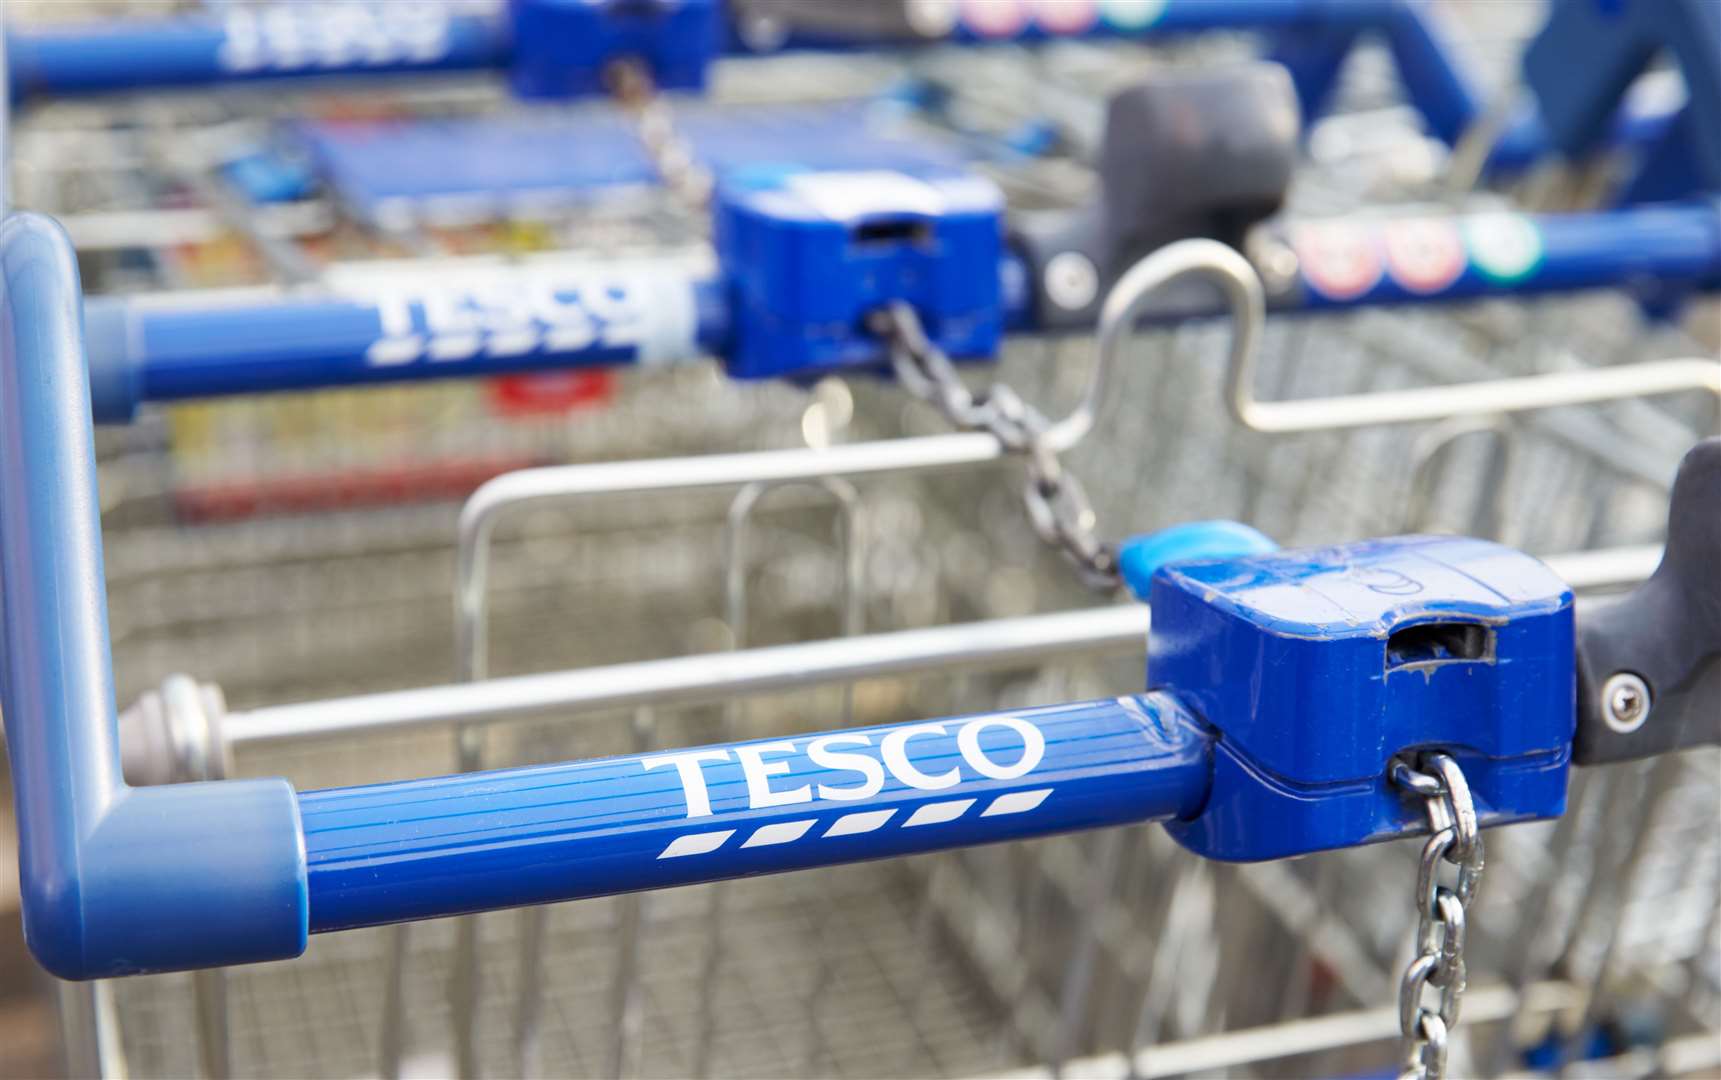 Tesco was one of the first to offer exclusive grocery prices to members